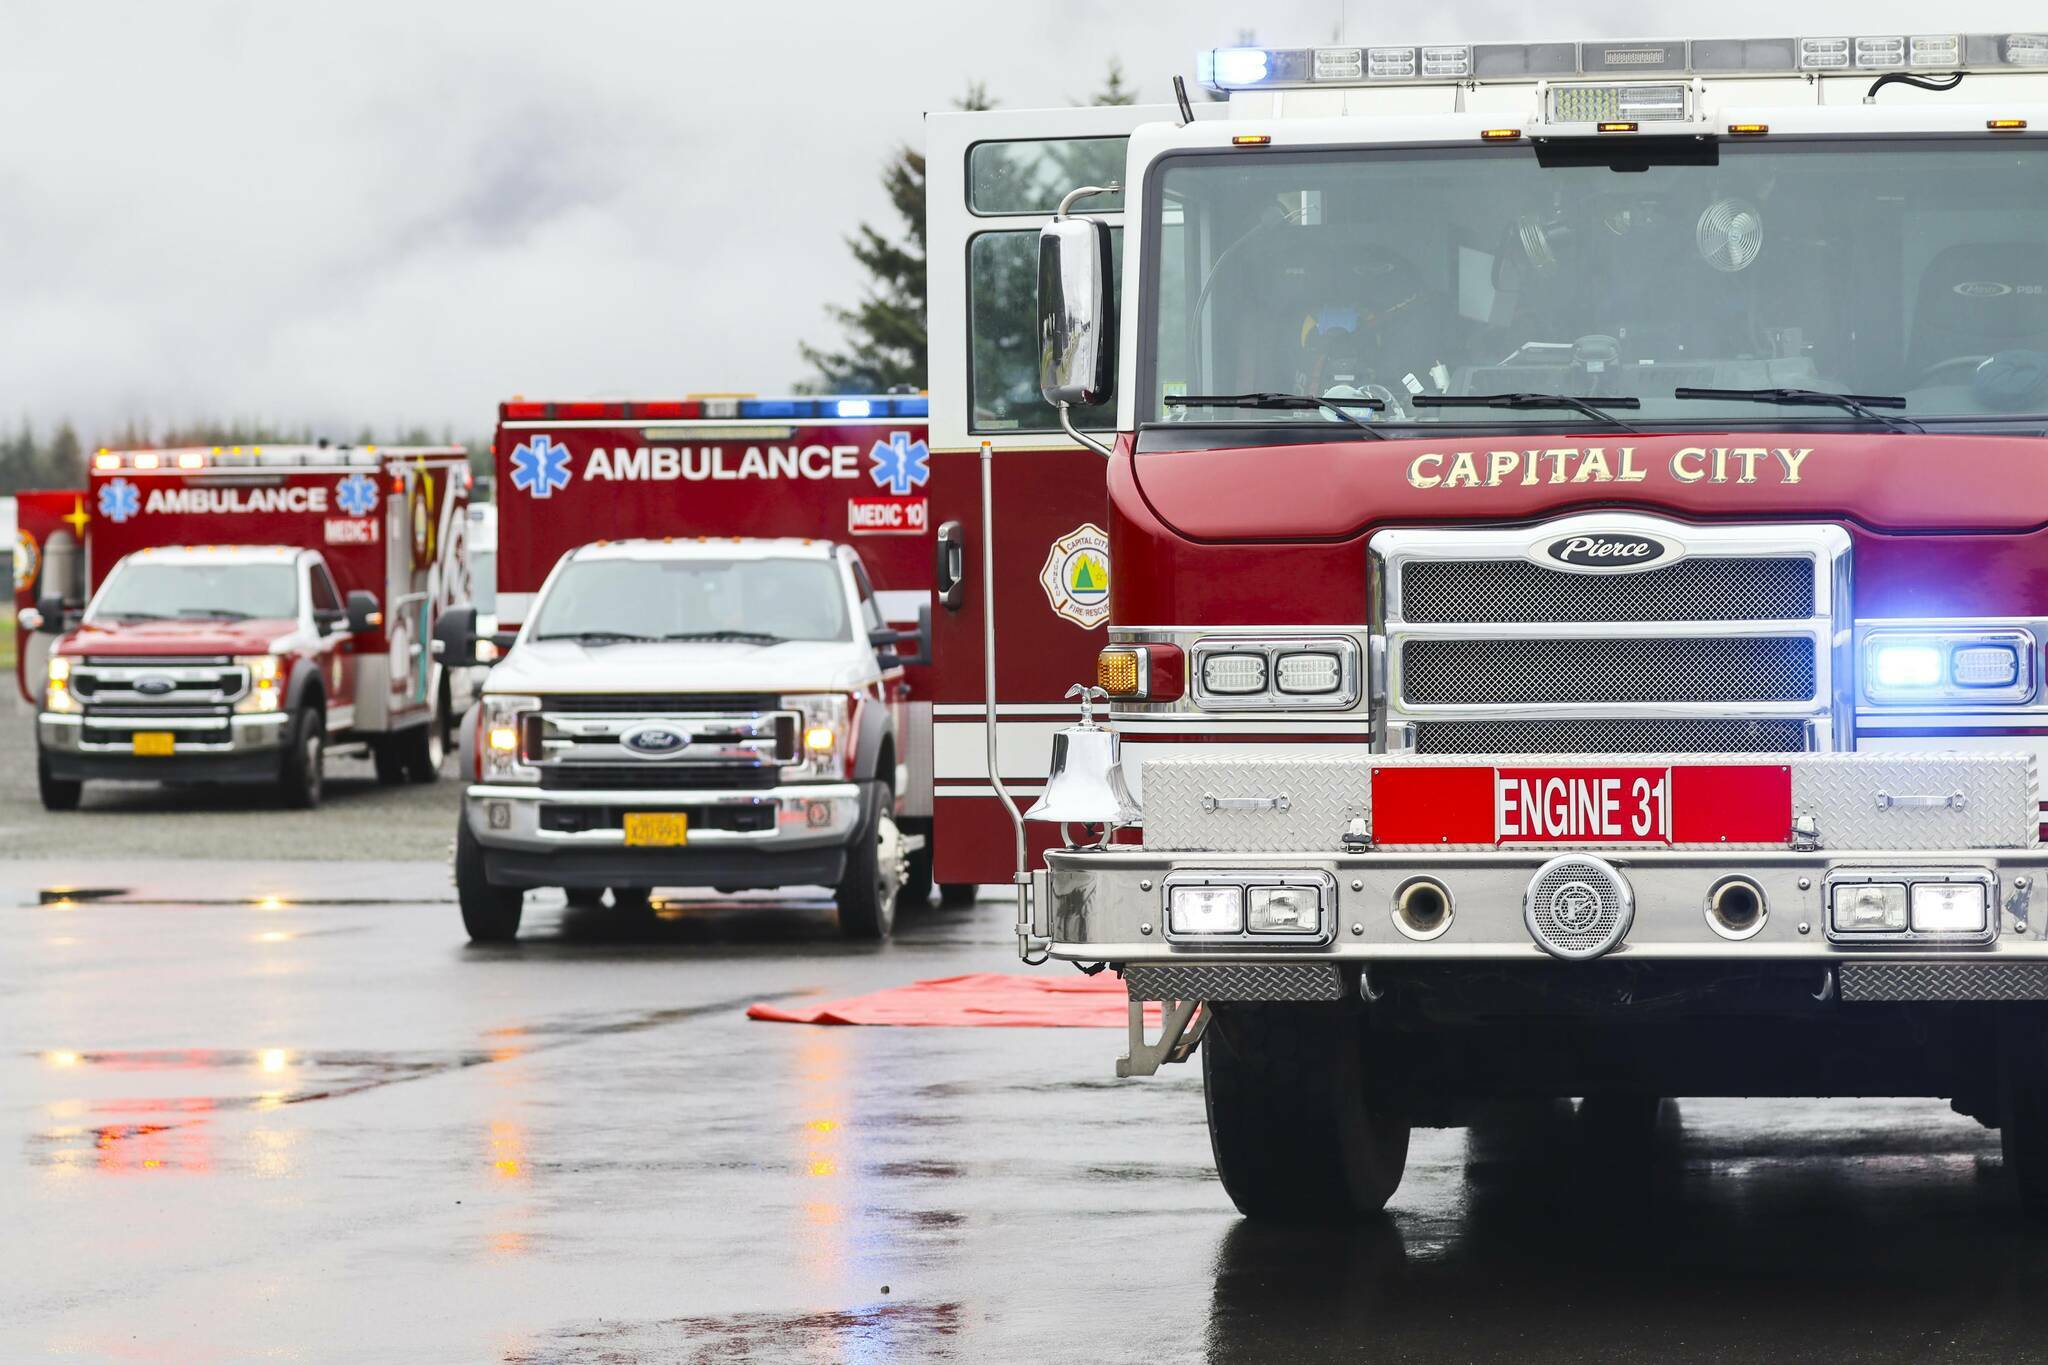 Capital City Fire/Rescue responded to two residential fires within 12 hours this week, including one Thursday morning that destroyed a house and adjacent travel trailer. (Michael S. Lockett / Juneau Empire file photo)